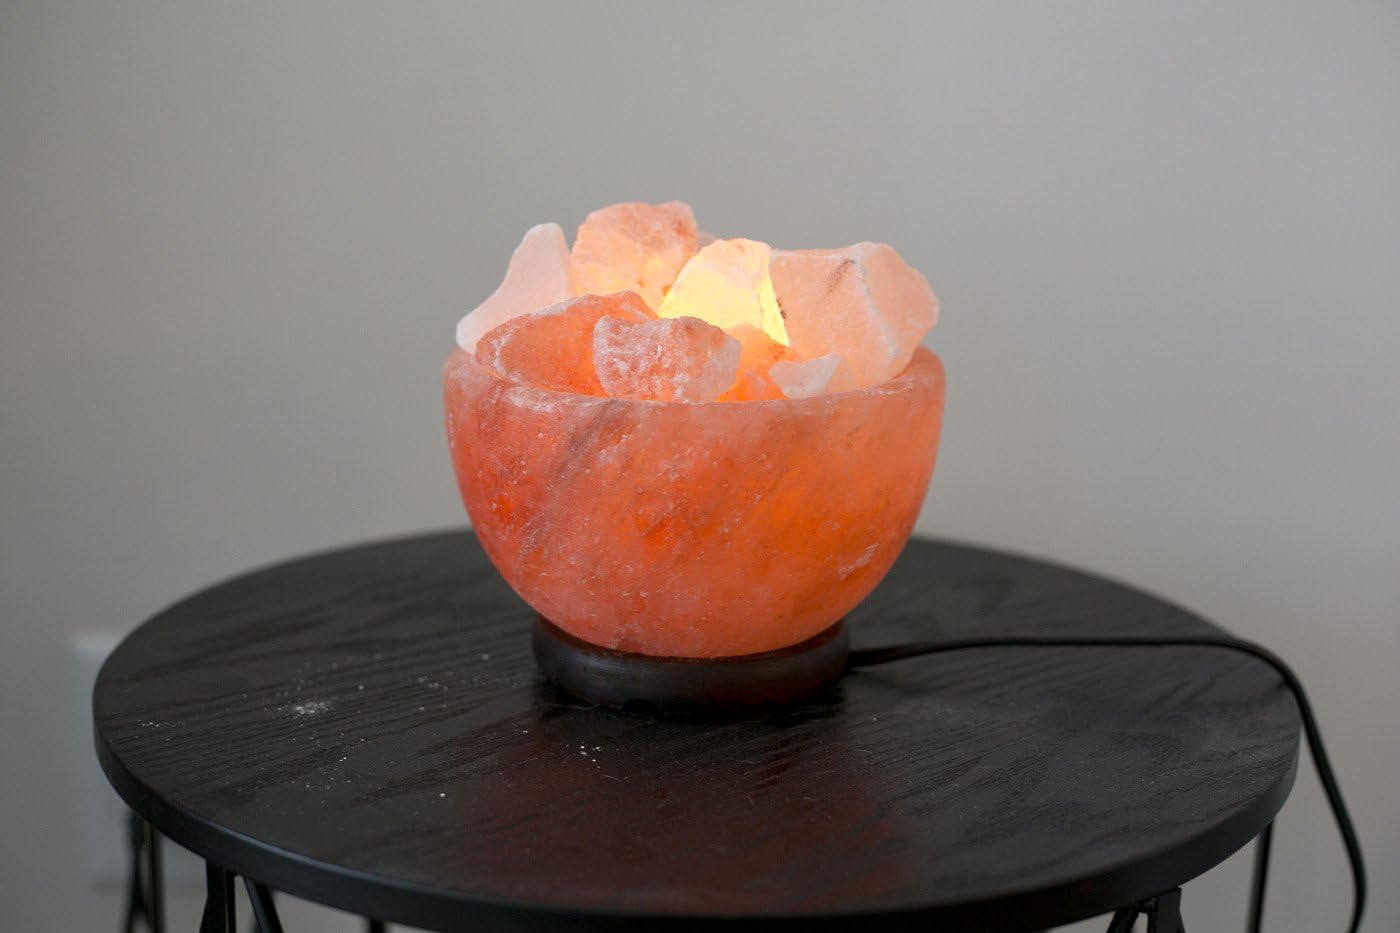 Enhance Your Space with the Warm Glow of Ambient Authentic Natural Himalayan Salt Lamp Bowl – Hand Crafted from Genuine Crystal Salt Rock with UL Listed Dimmer Switch